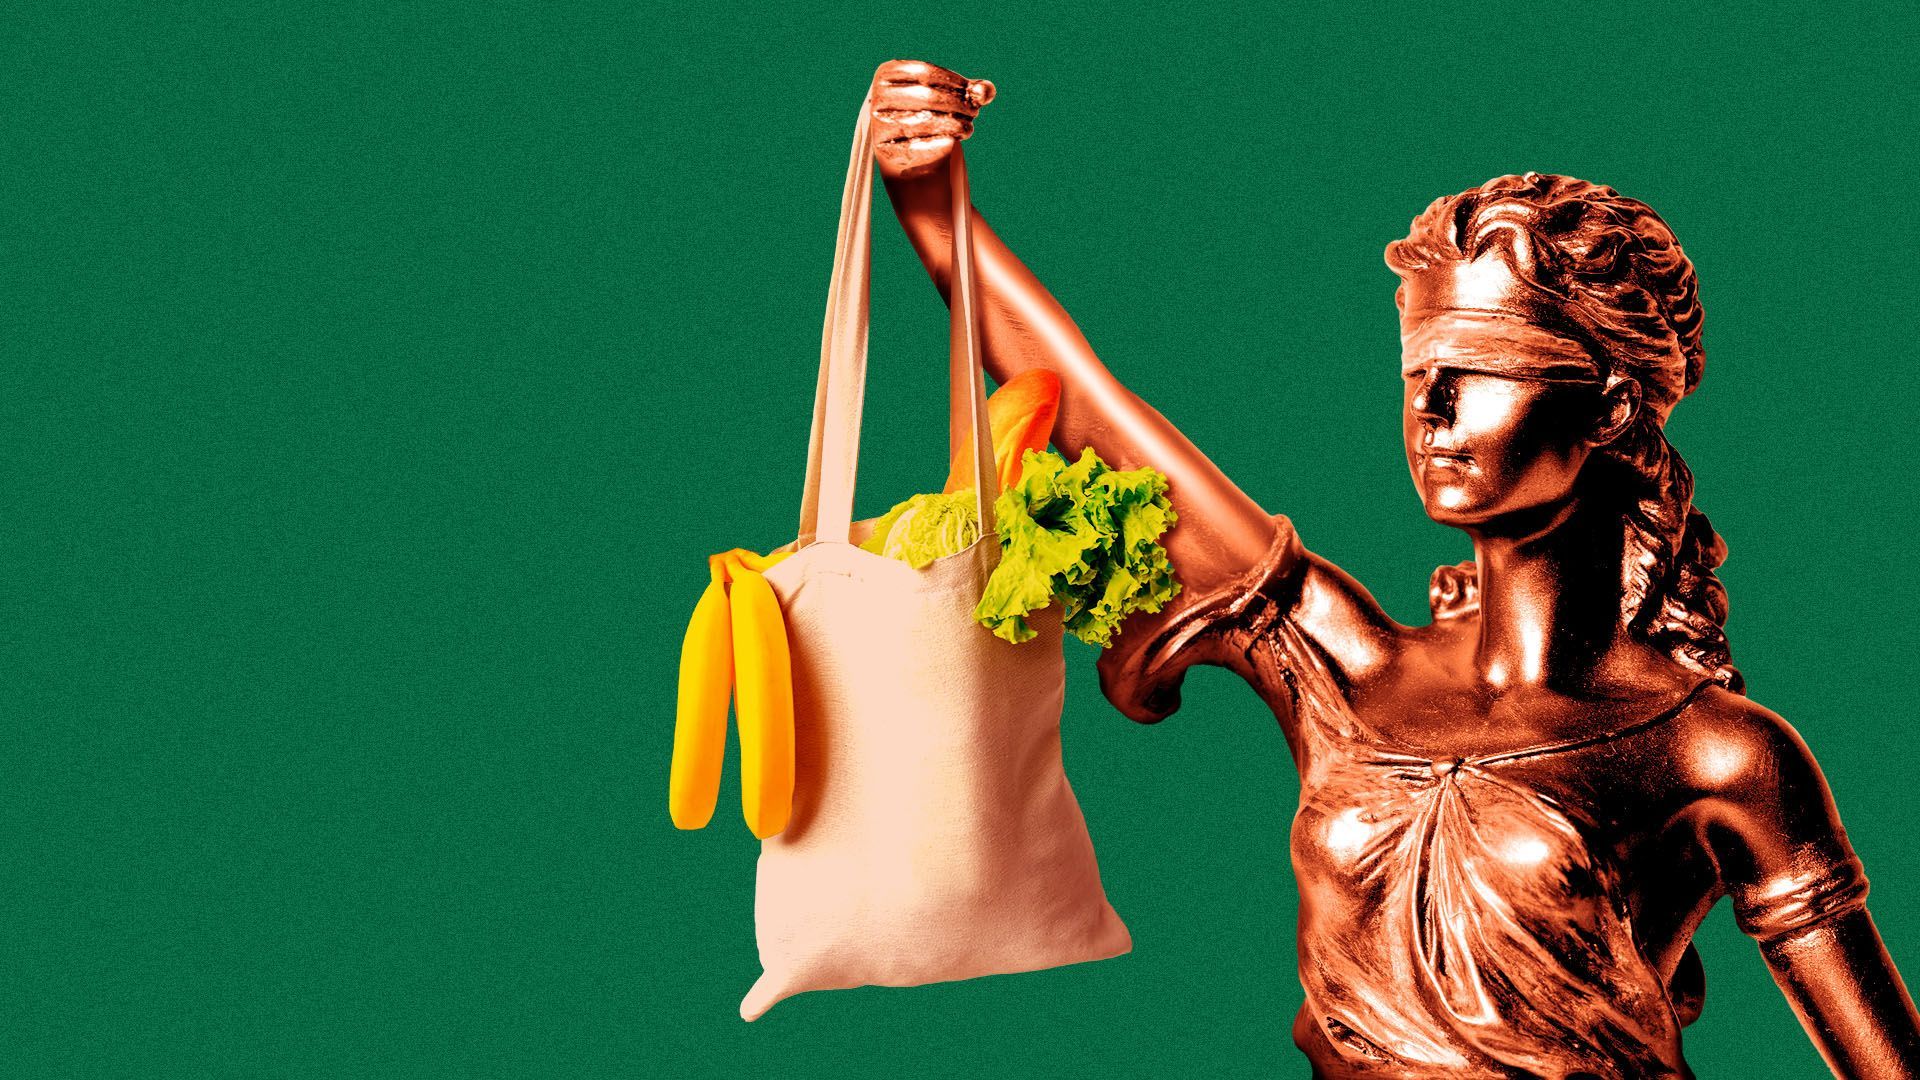 Illustration of a statue of Justice holding a bag of groceries